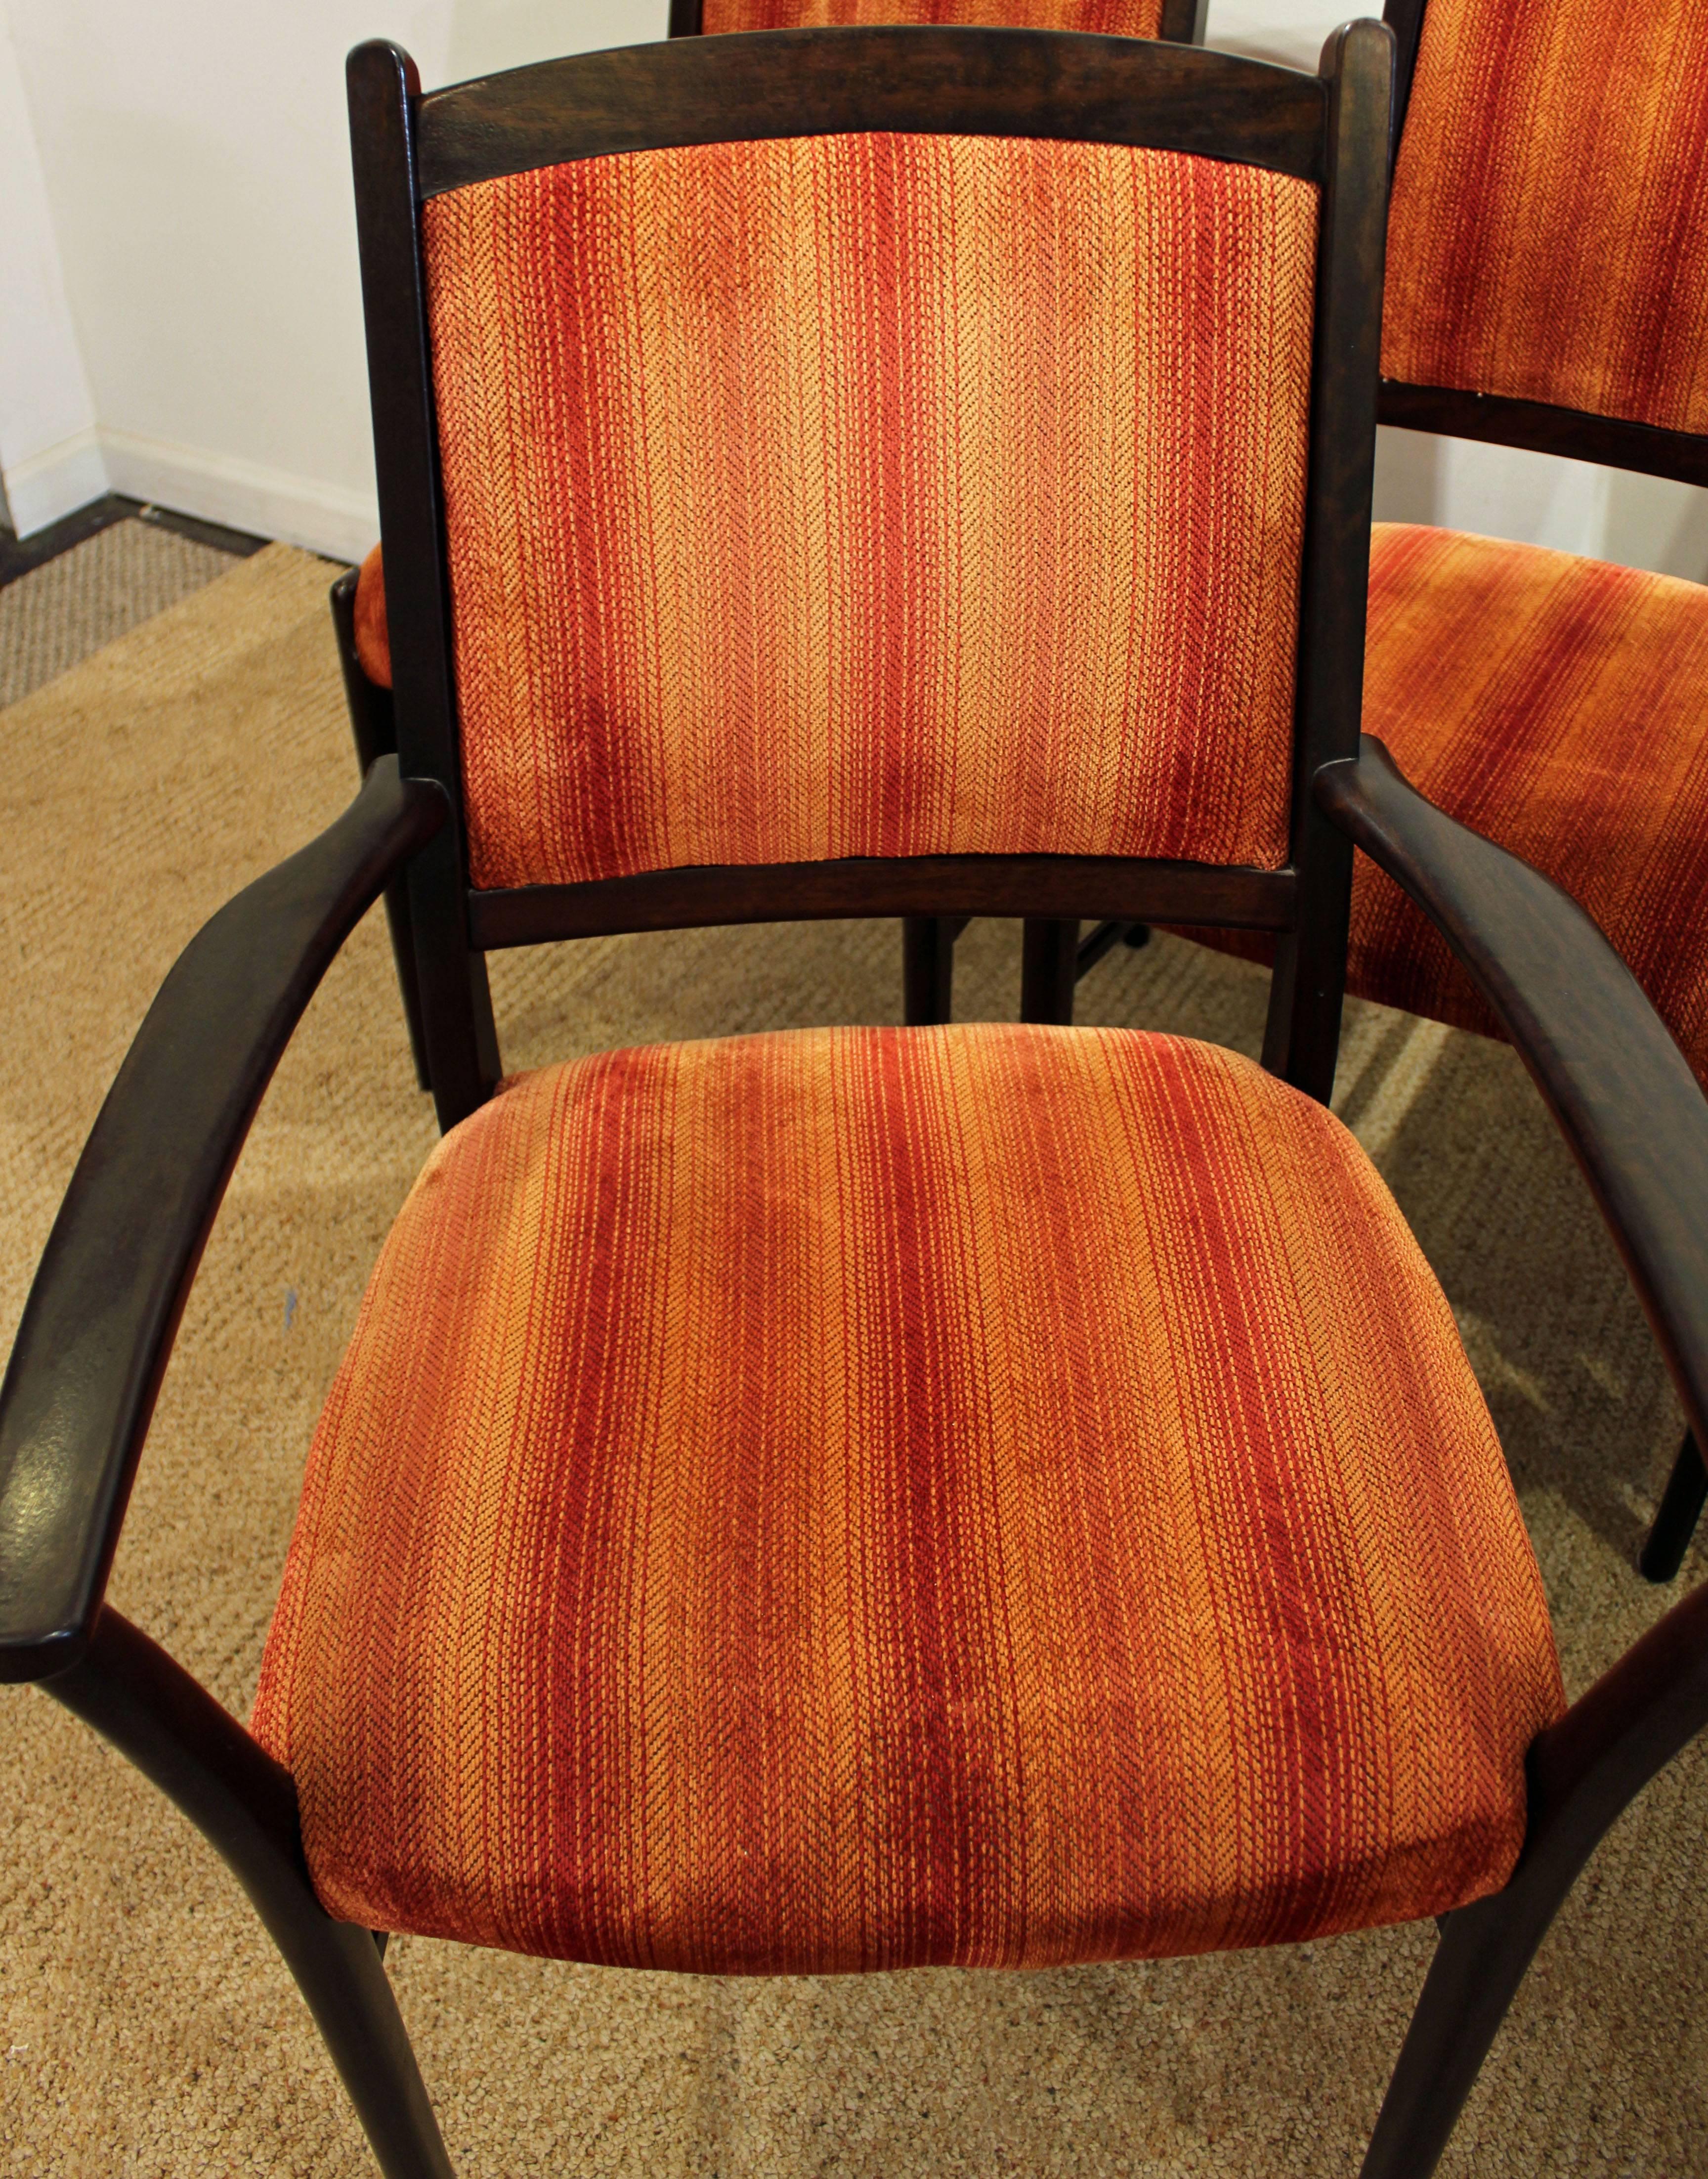 These chairs are made of rosewood. Includes two armchairs and four side chairs.

Dimensions:
armchairs: 23